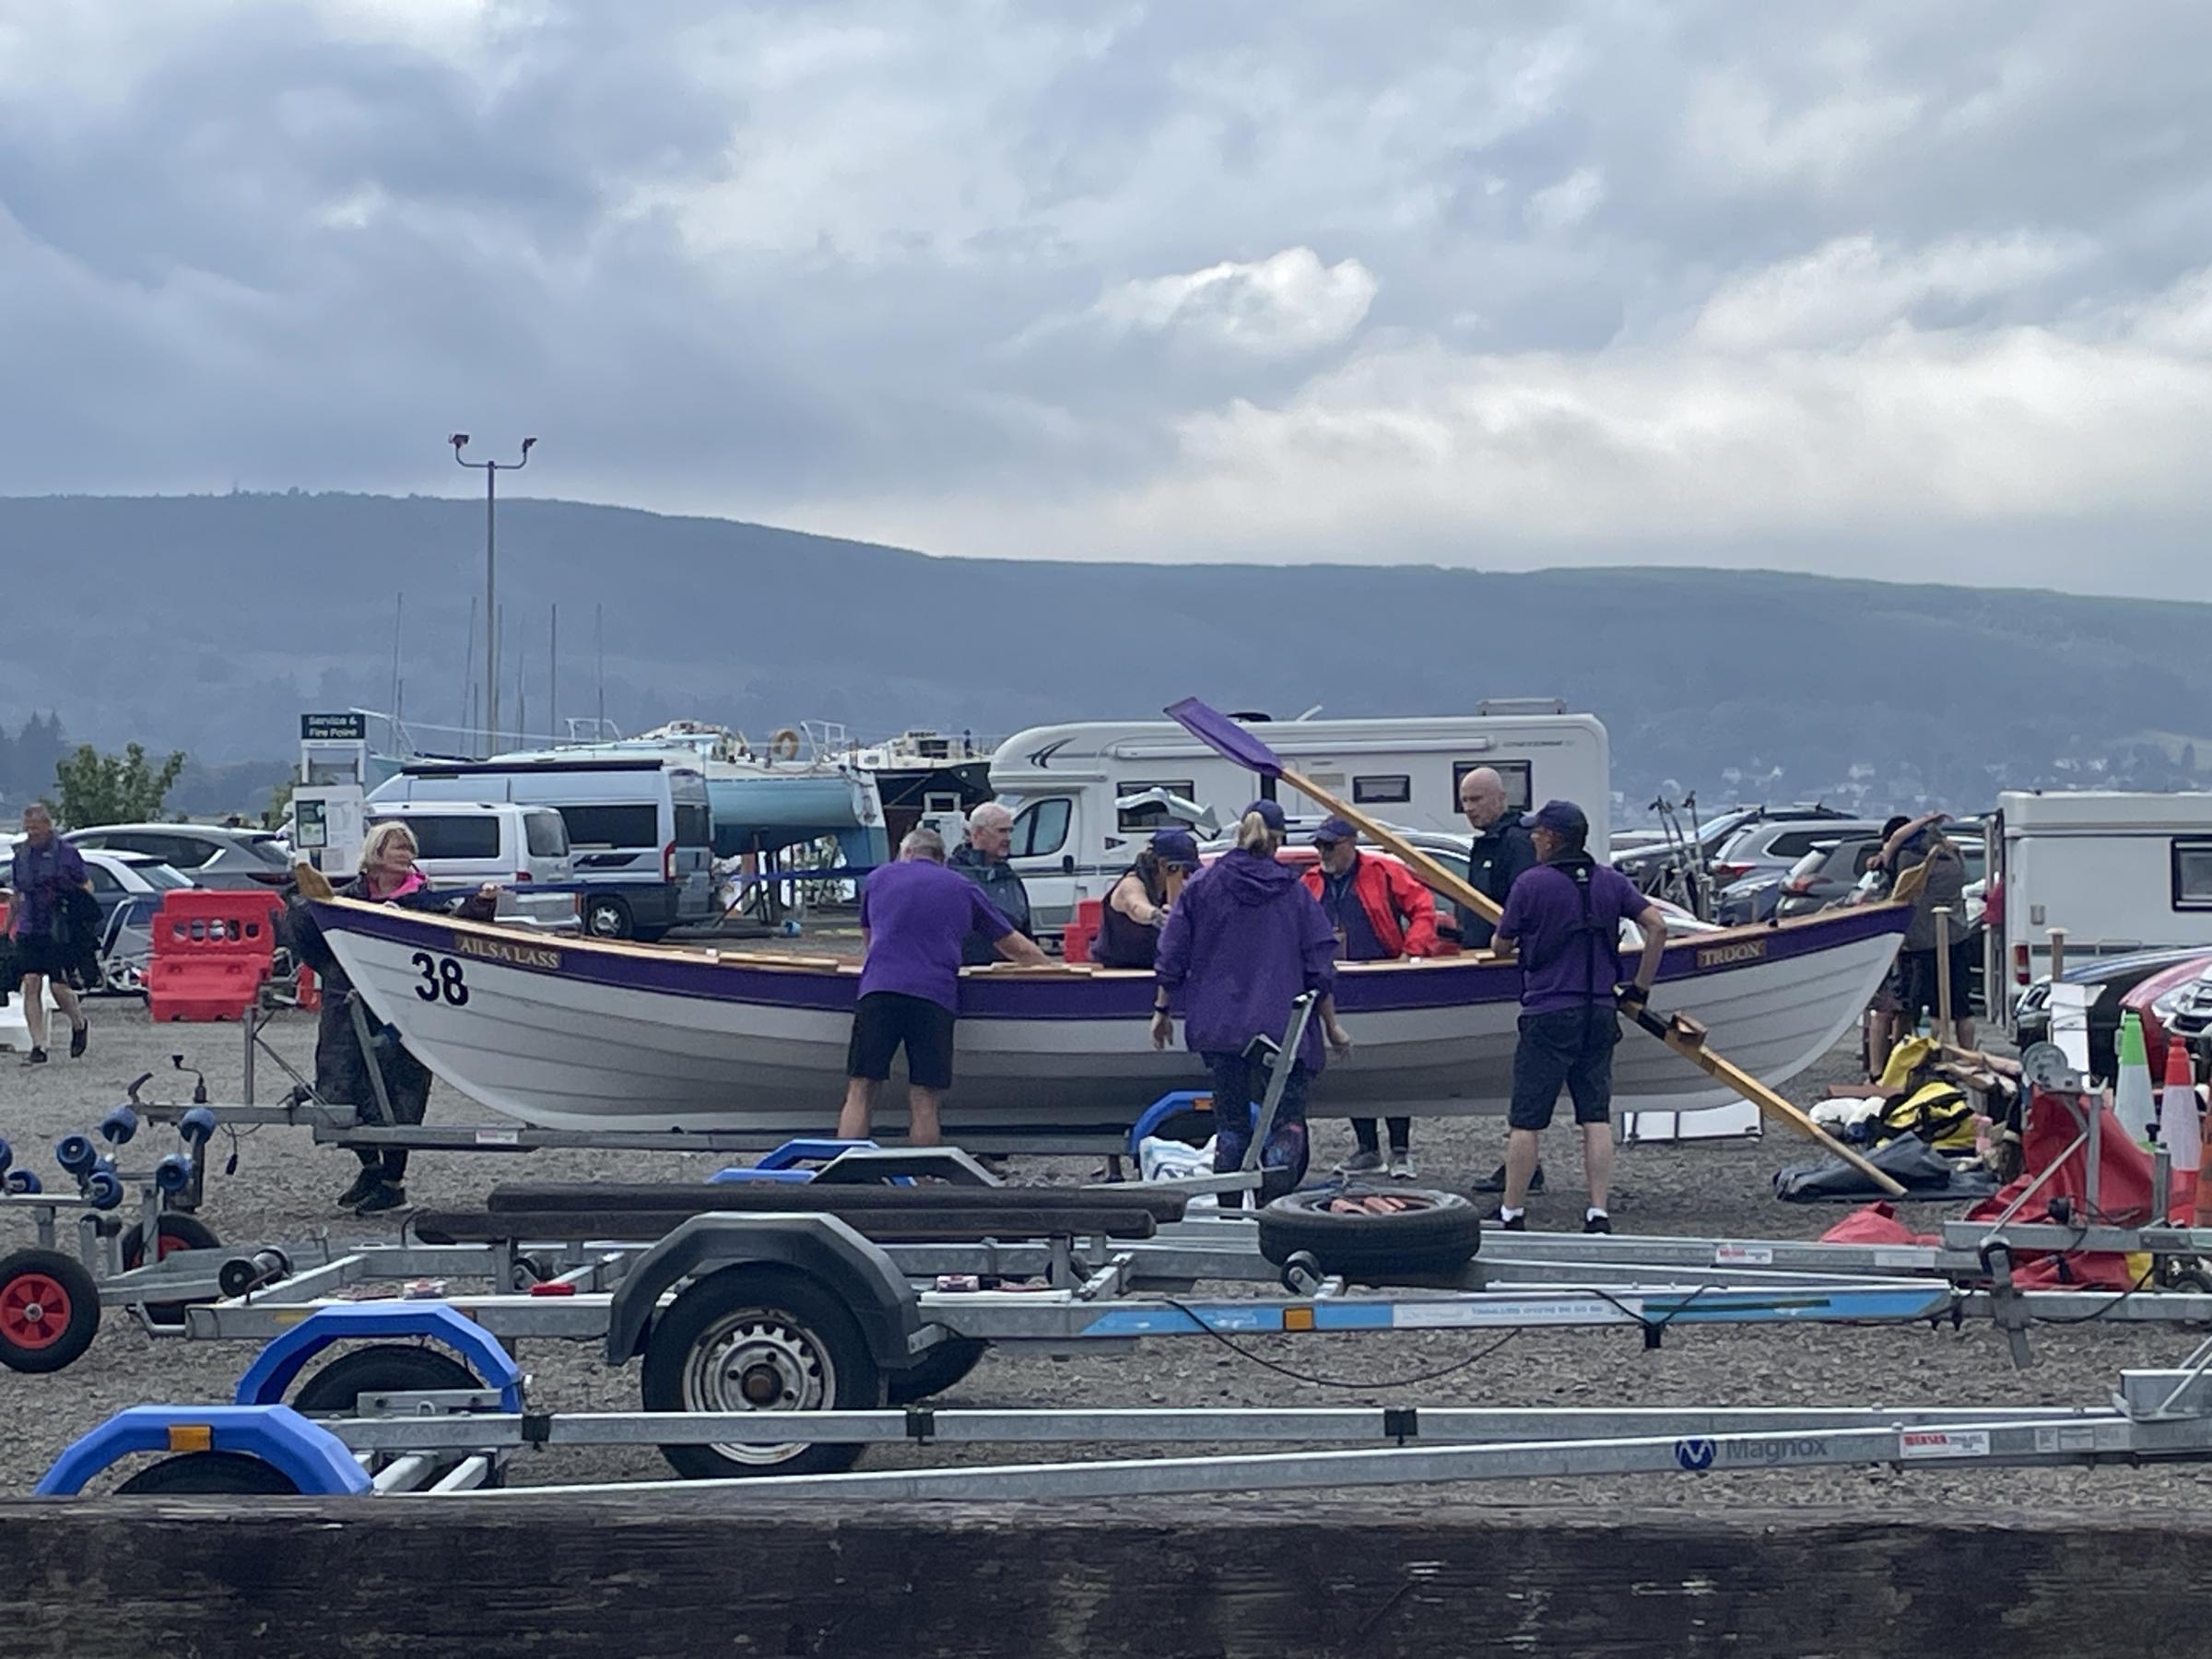 The Royal Northern and Clyde Yacht Club held its second coastal rowing regatta on September 9 (Photo: RNCYC)